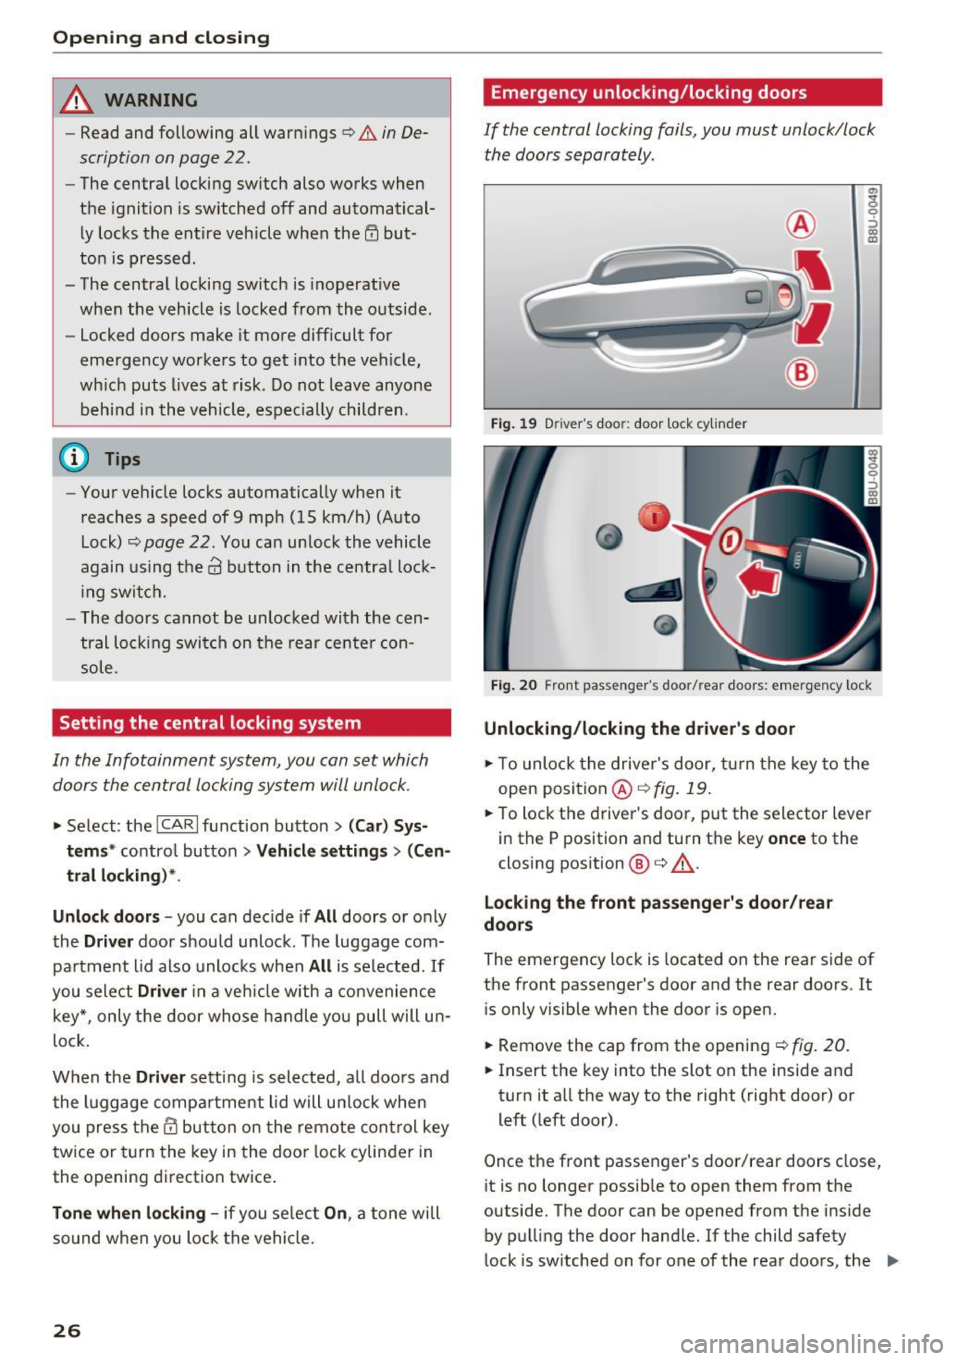 AUDI Q3 2018  Owners Manual Opening  and clo sin g 
_& WARNING 
- Read  and  following  all  warn ings c::> .&. in De­
scription  on page 
22 . 
- The  centra l locking  switch  also  works  when 
the  ignition  is switched  of